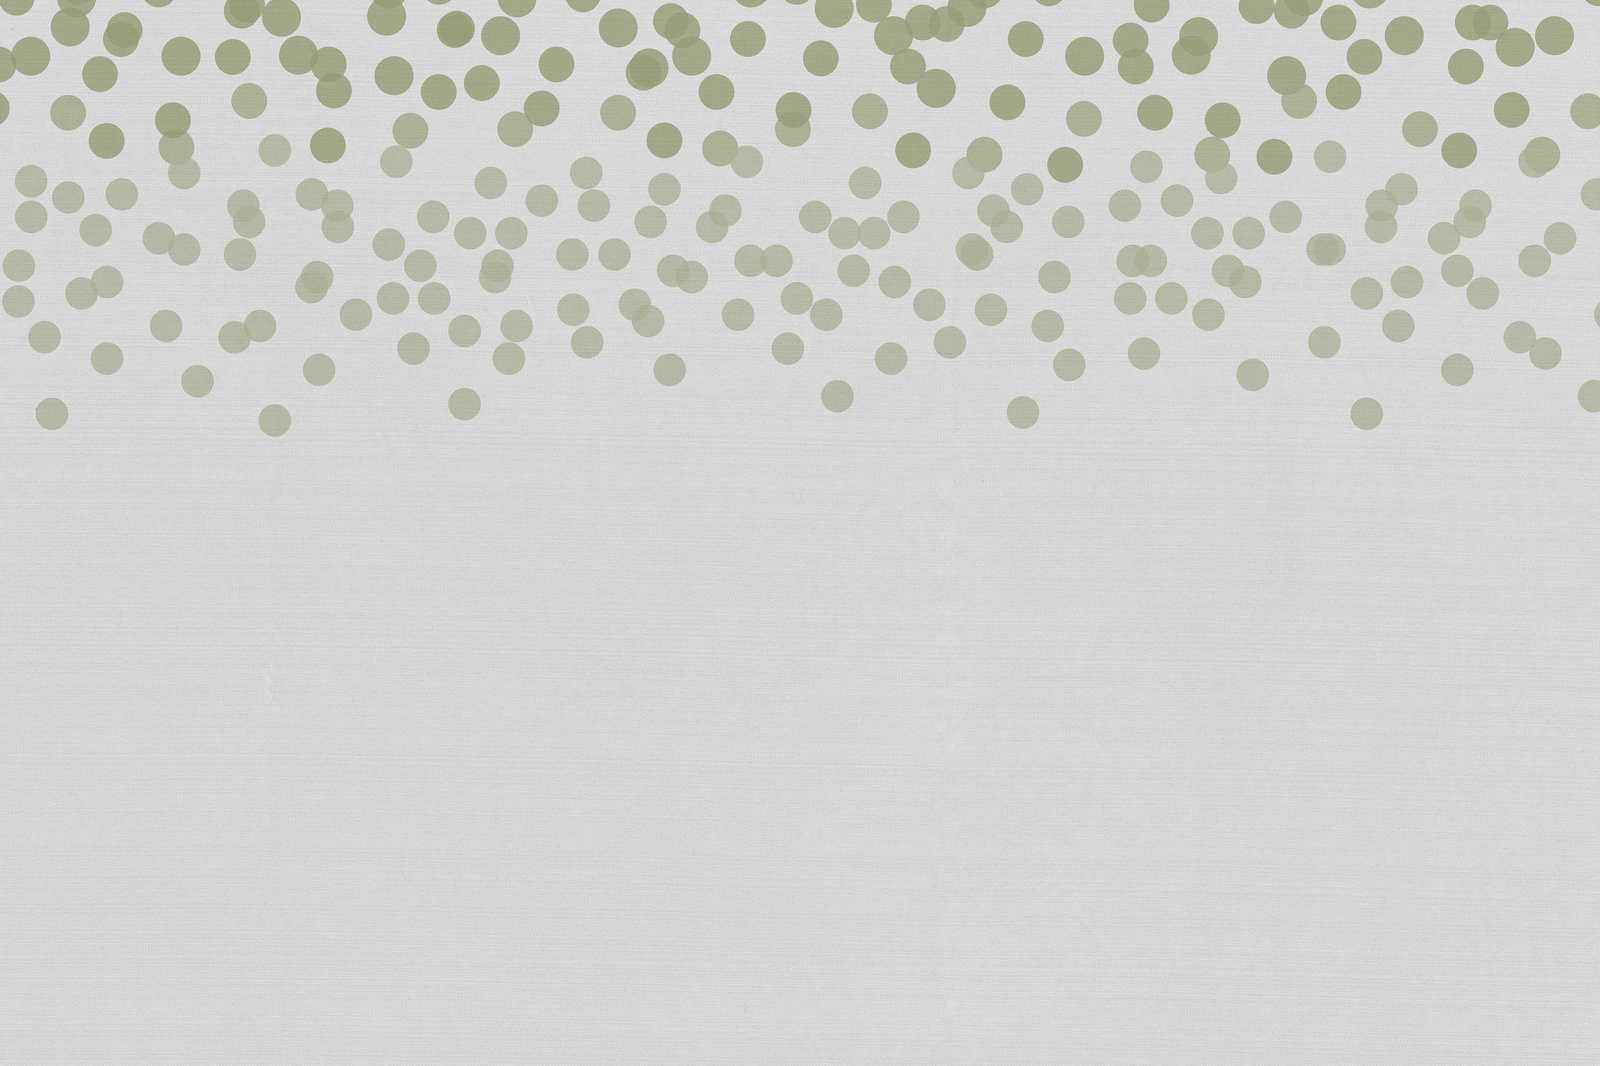             Canvas painting with discreet dot pattern | green, grey - 0.90 m x 0.60 m
        